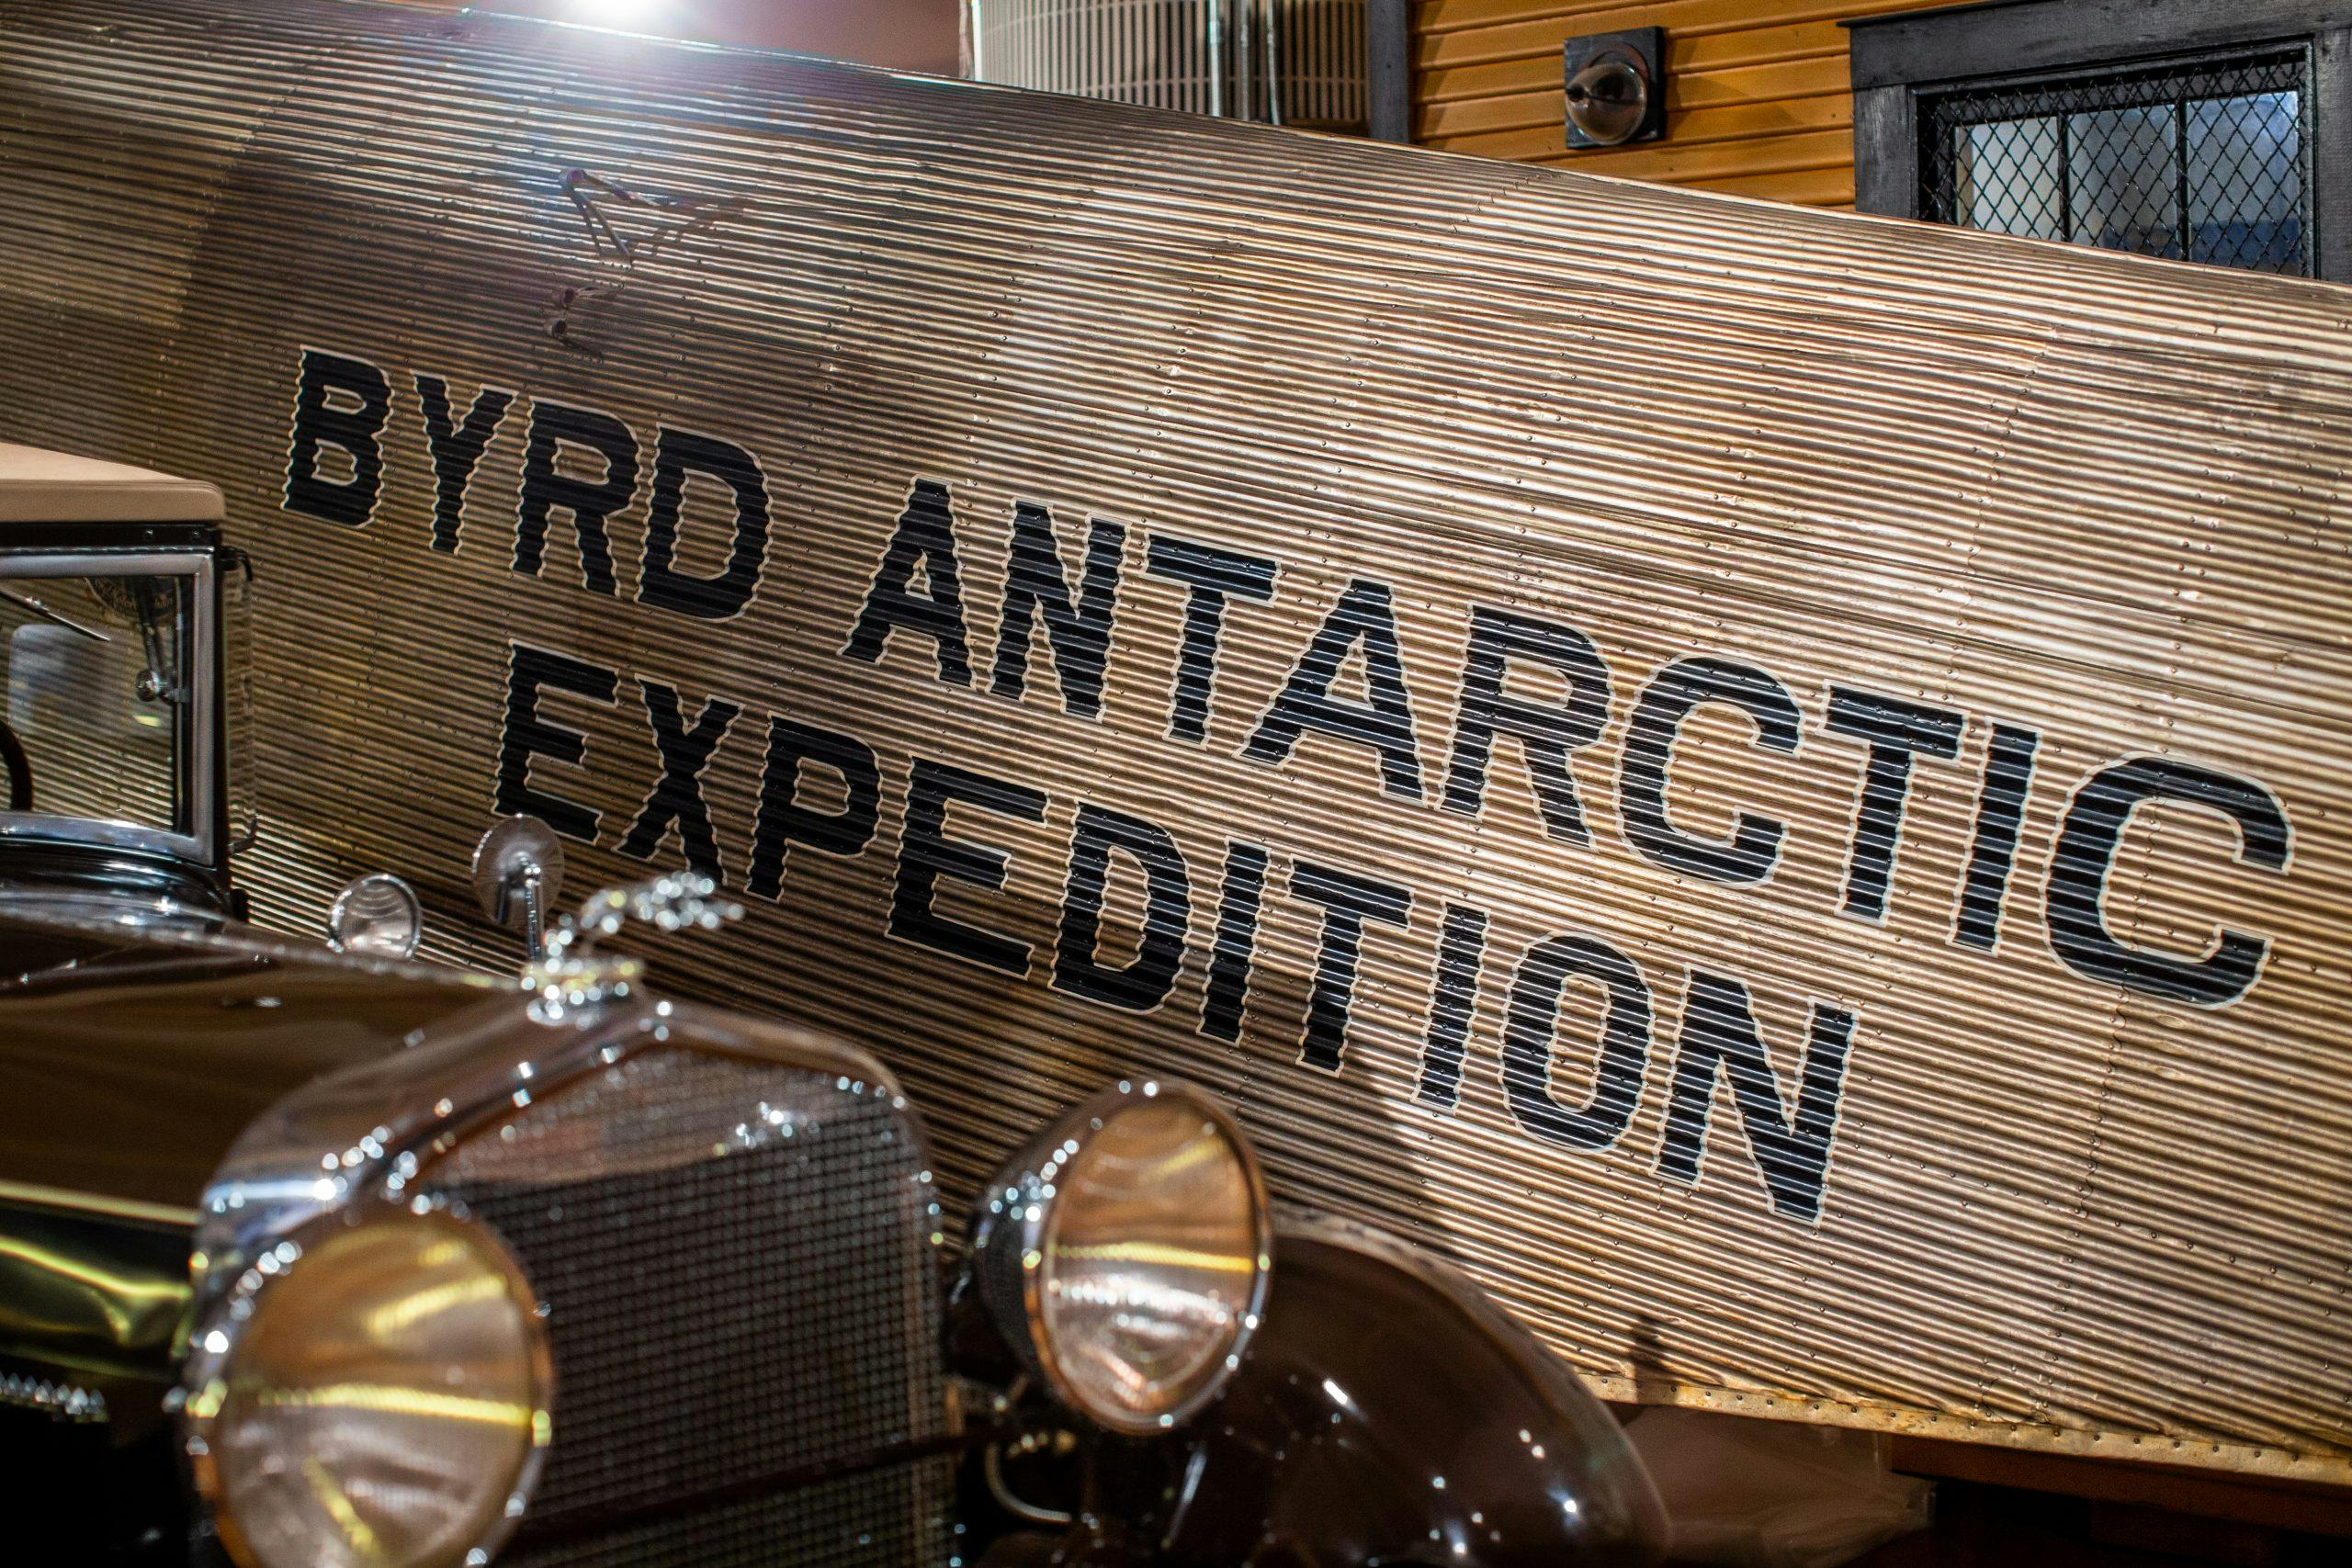 Ford Trimotor plane byrd antarctic expedition